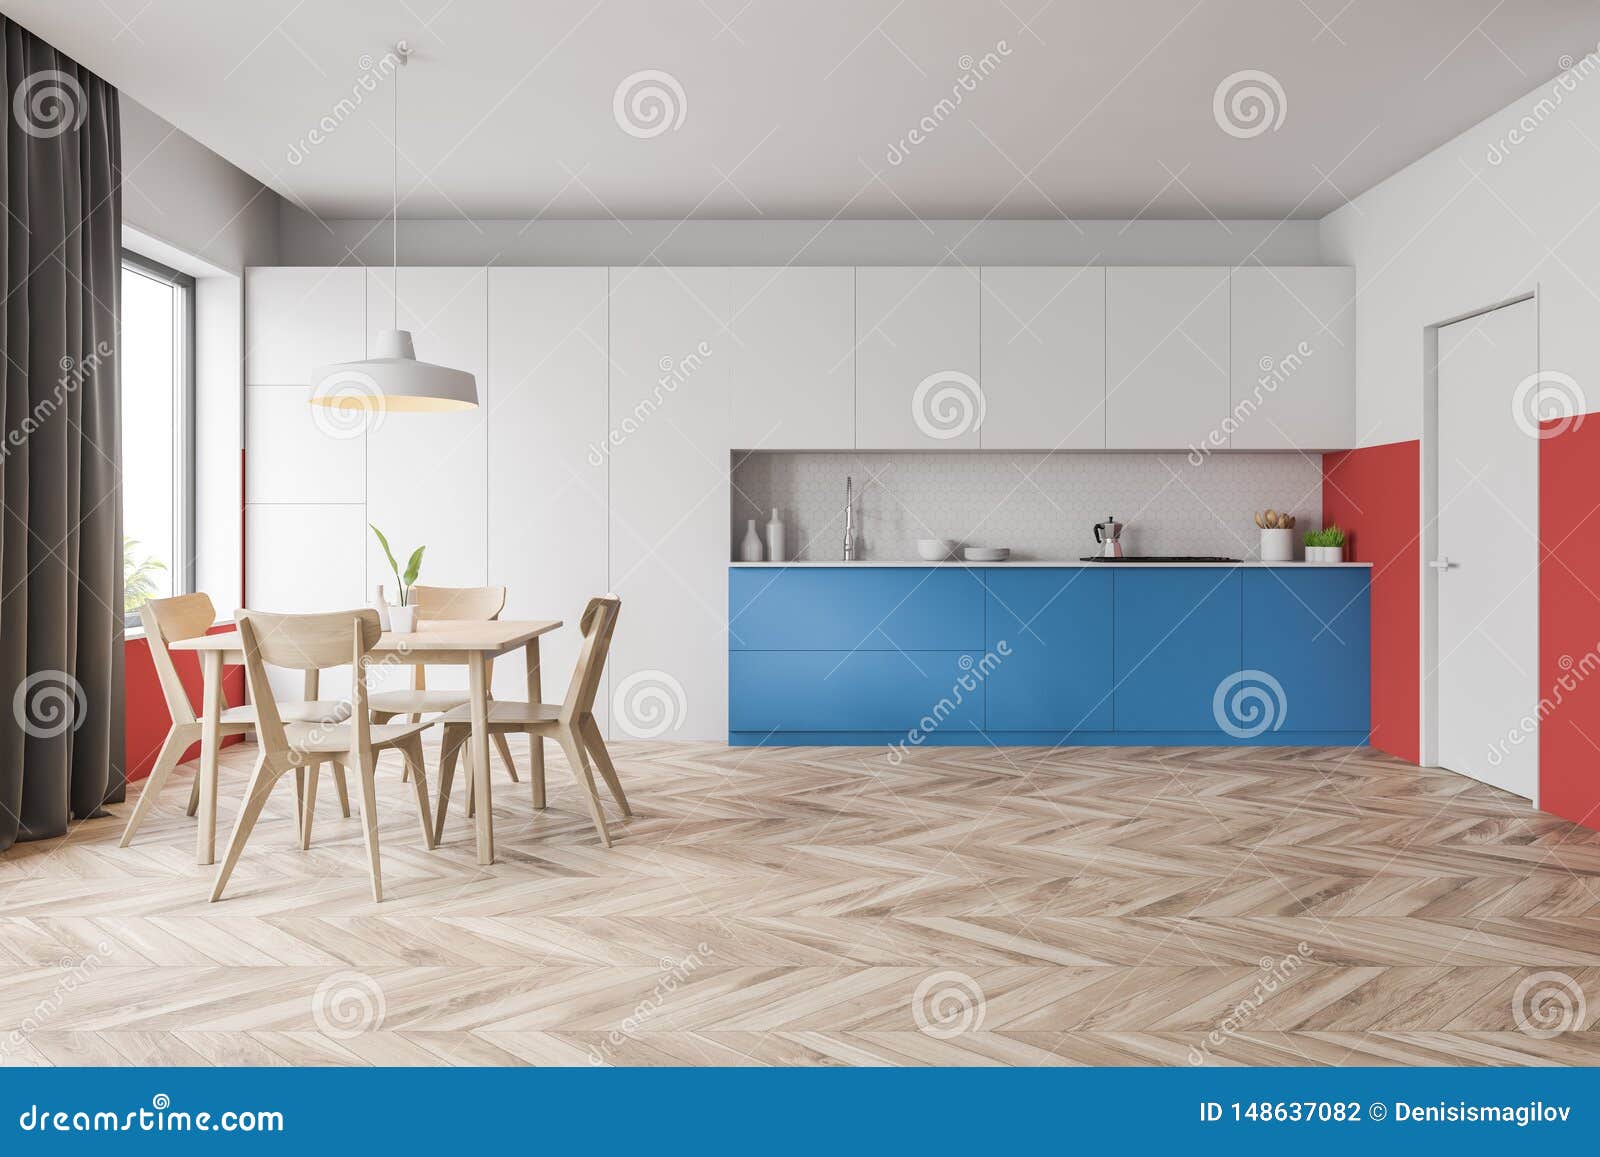 White Kitchen With Blue Countertops And Table Stock Illustration